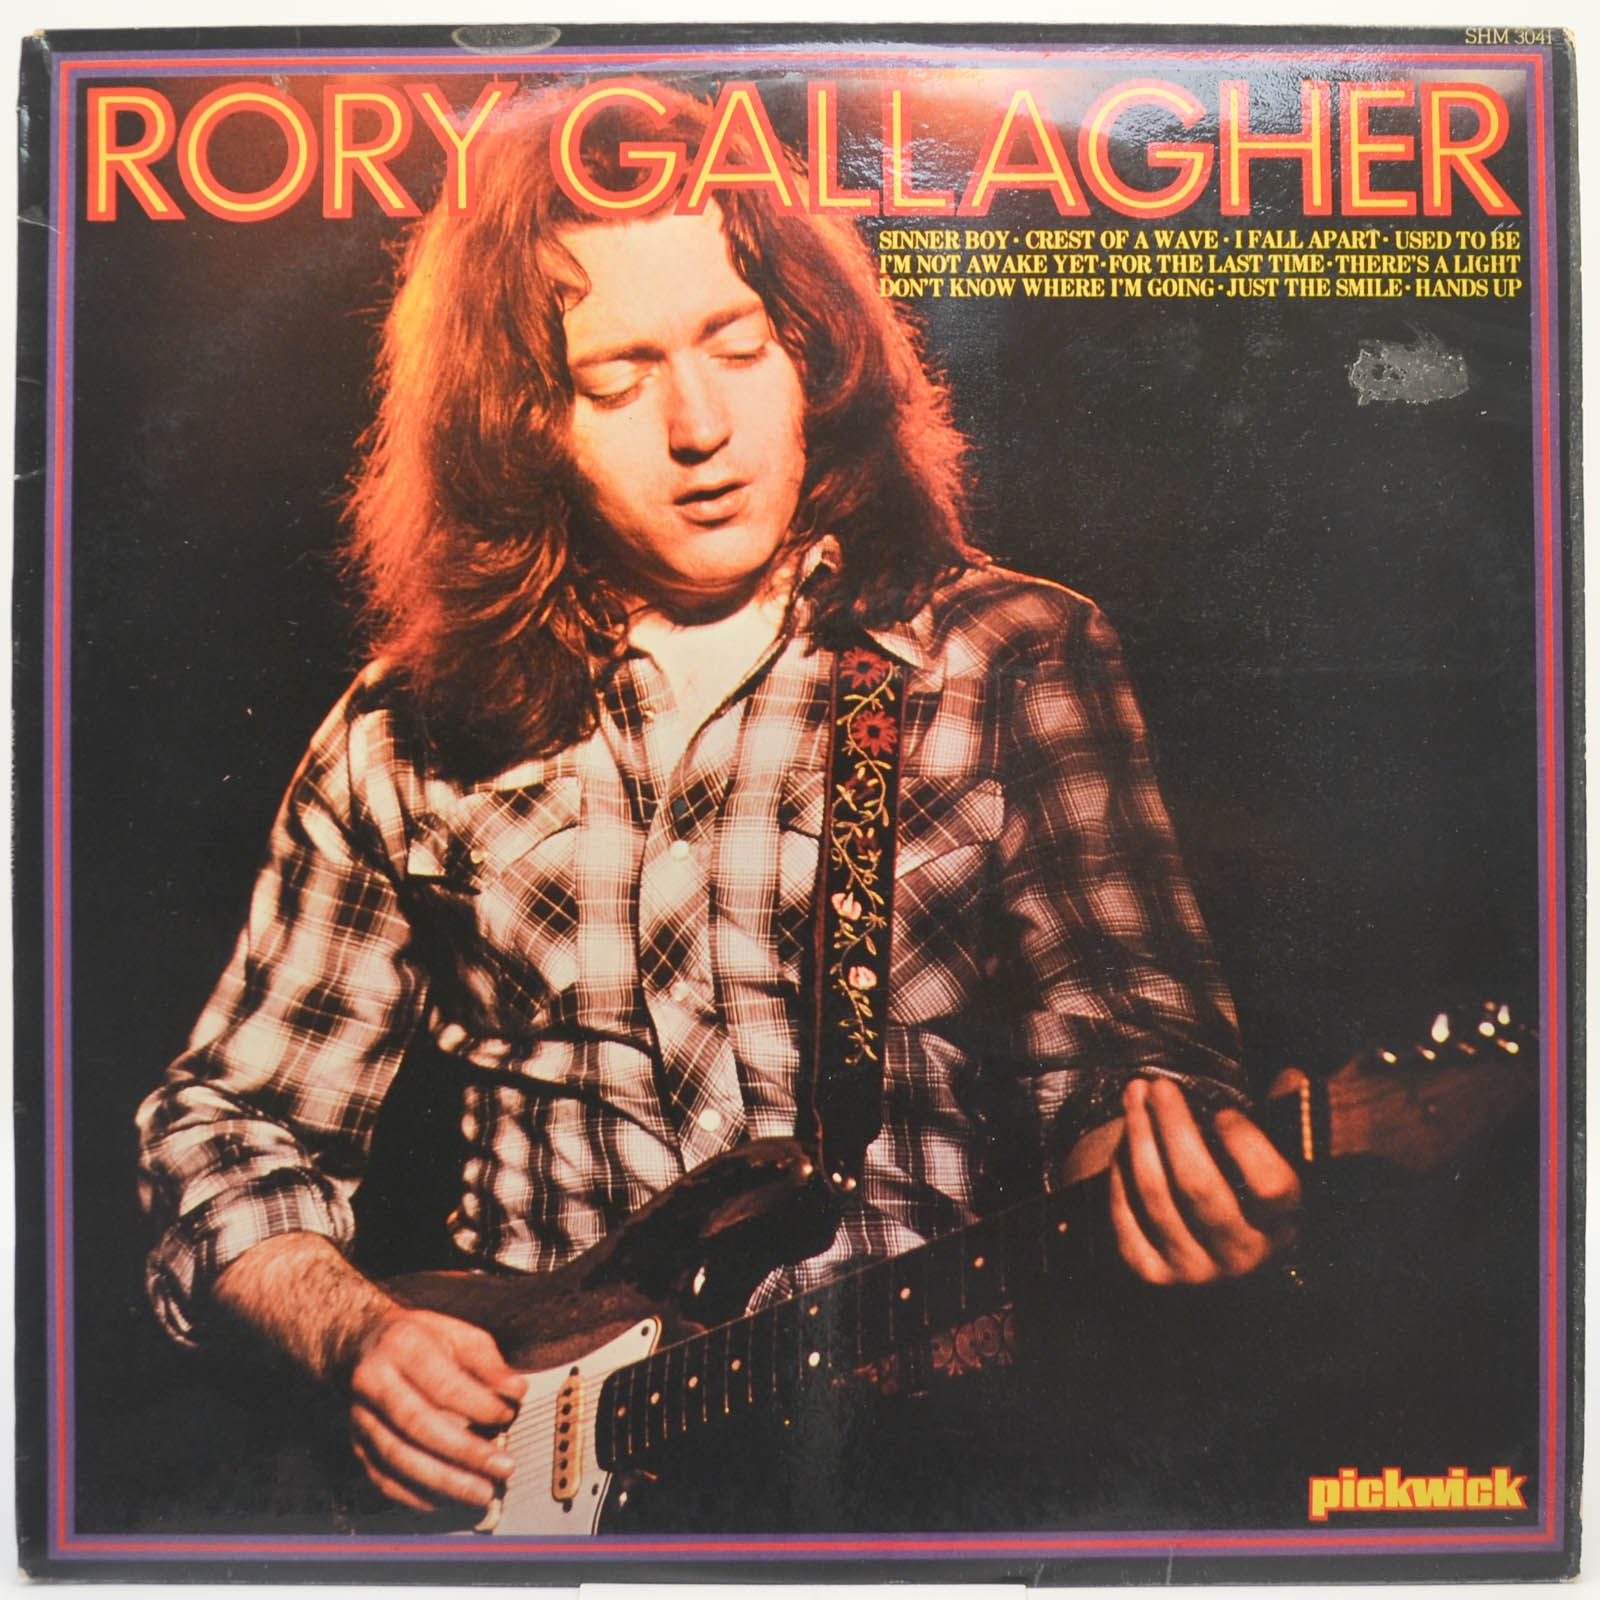 Rory Gallagher — Rory Gallagher (UK), 1980